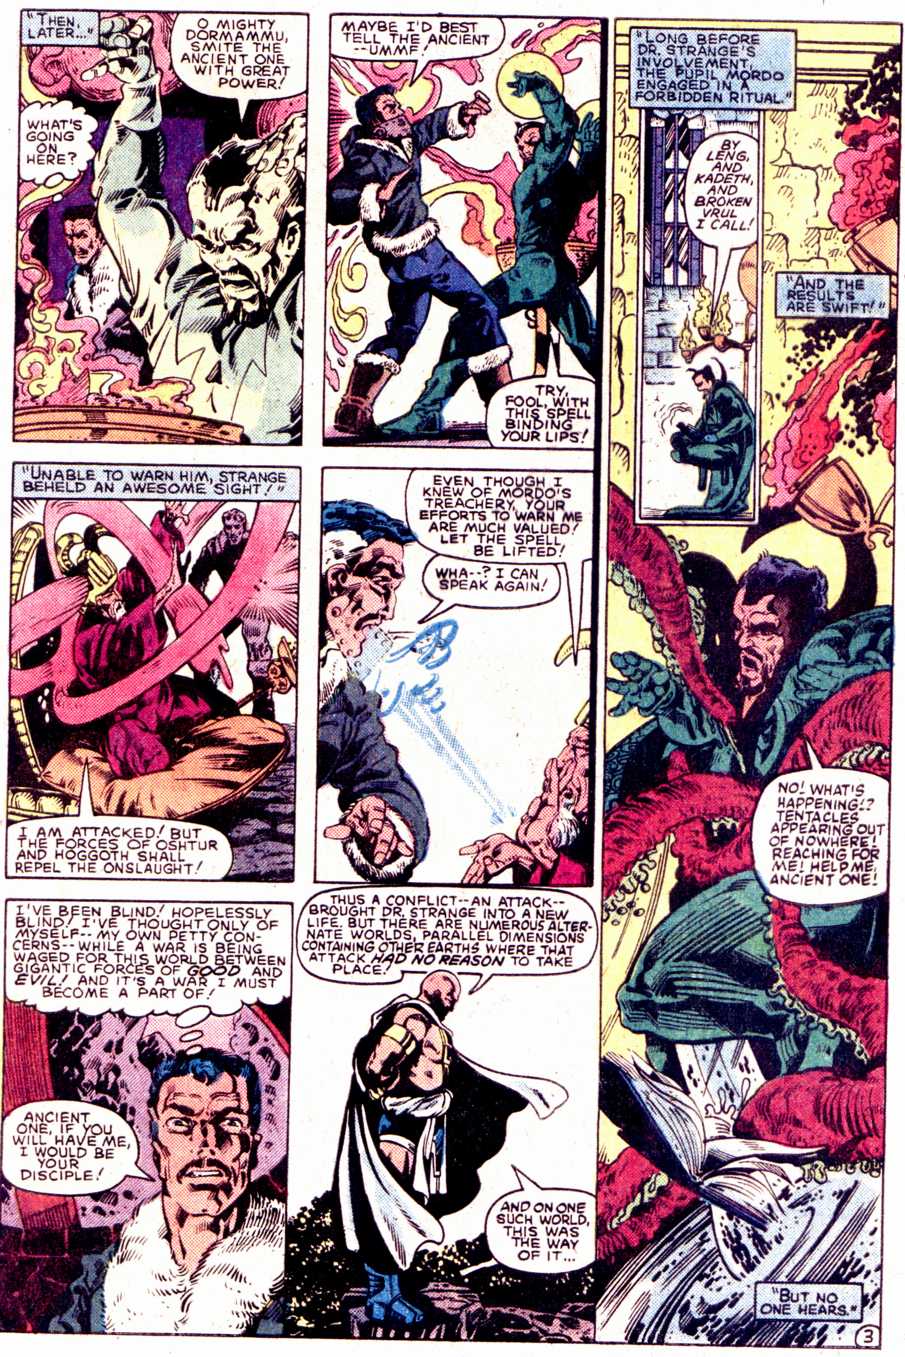 What If? (1977) issue 40 - Dr Strange had not become master of The mystic arts - Page 4